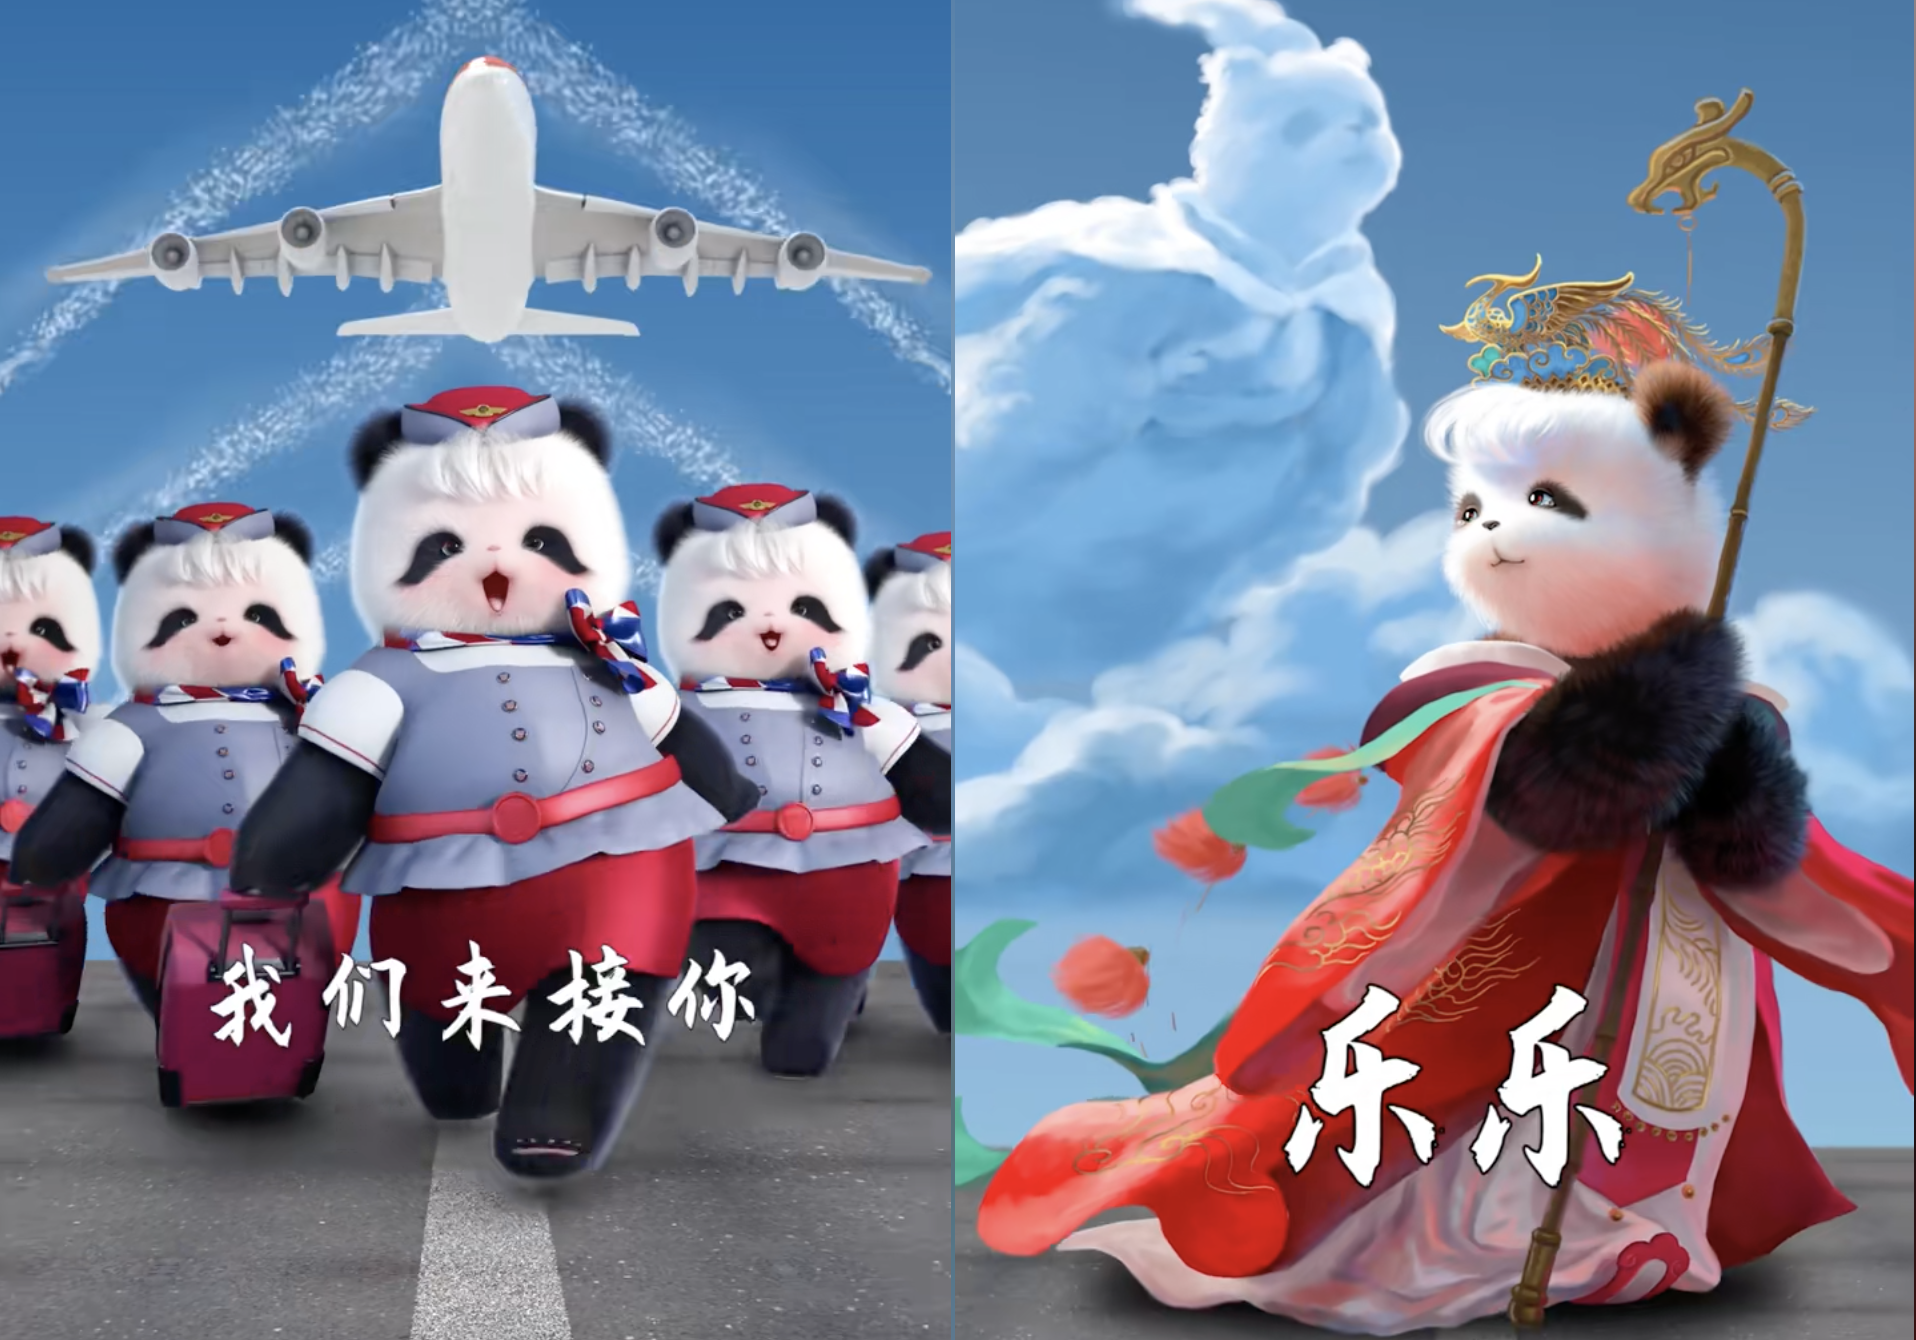 Panda exchange program targeted by misinformation, driving anti-US narratives in China